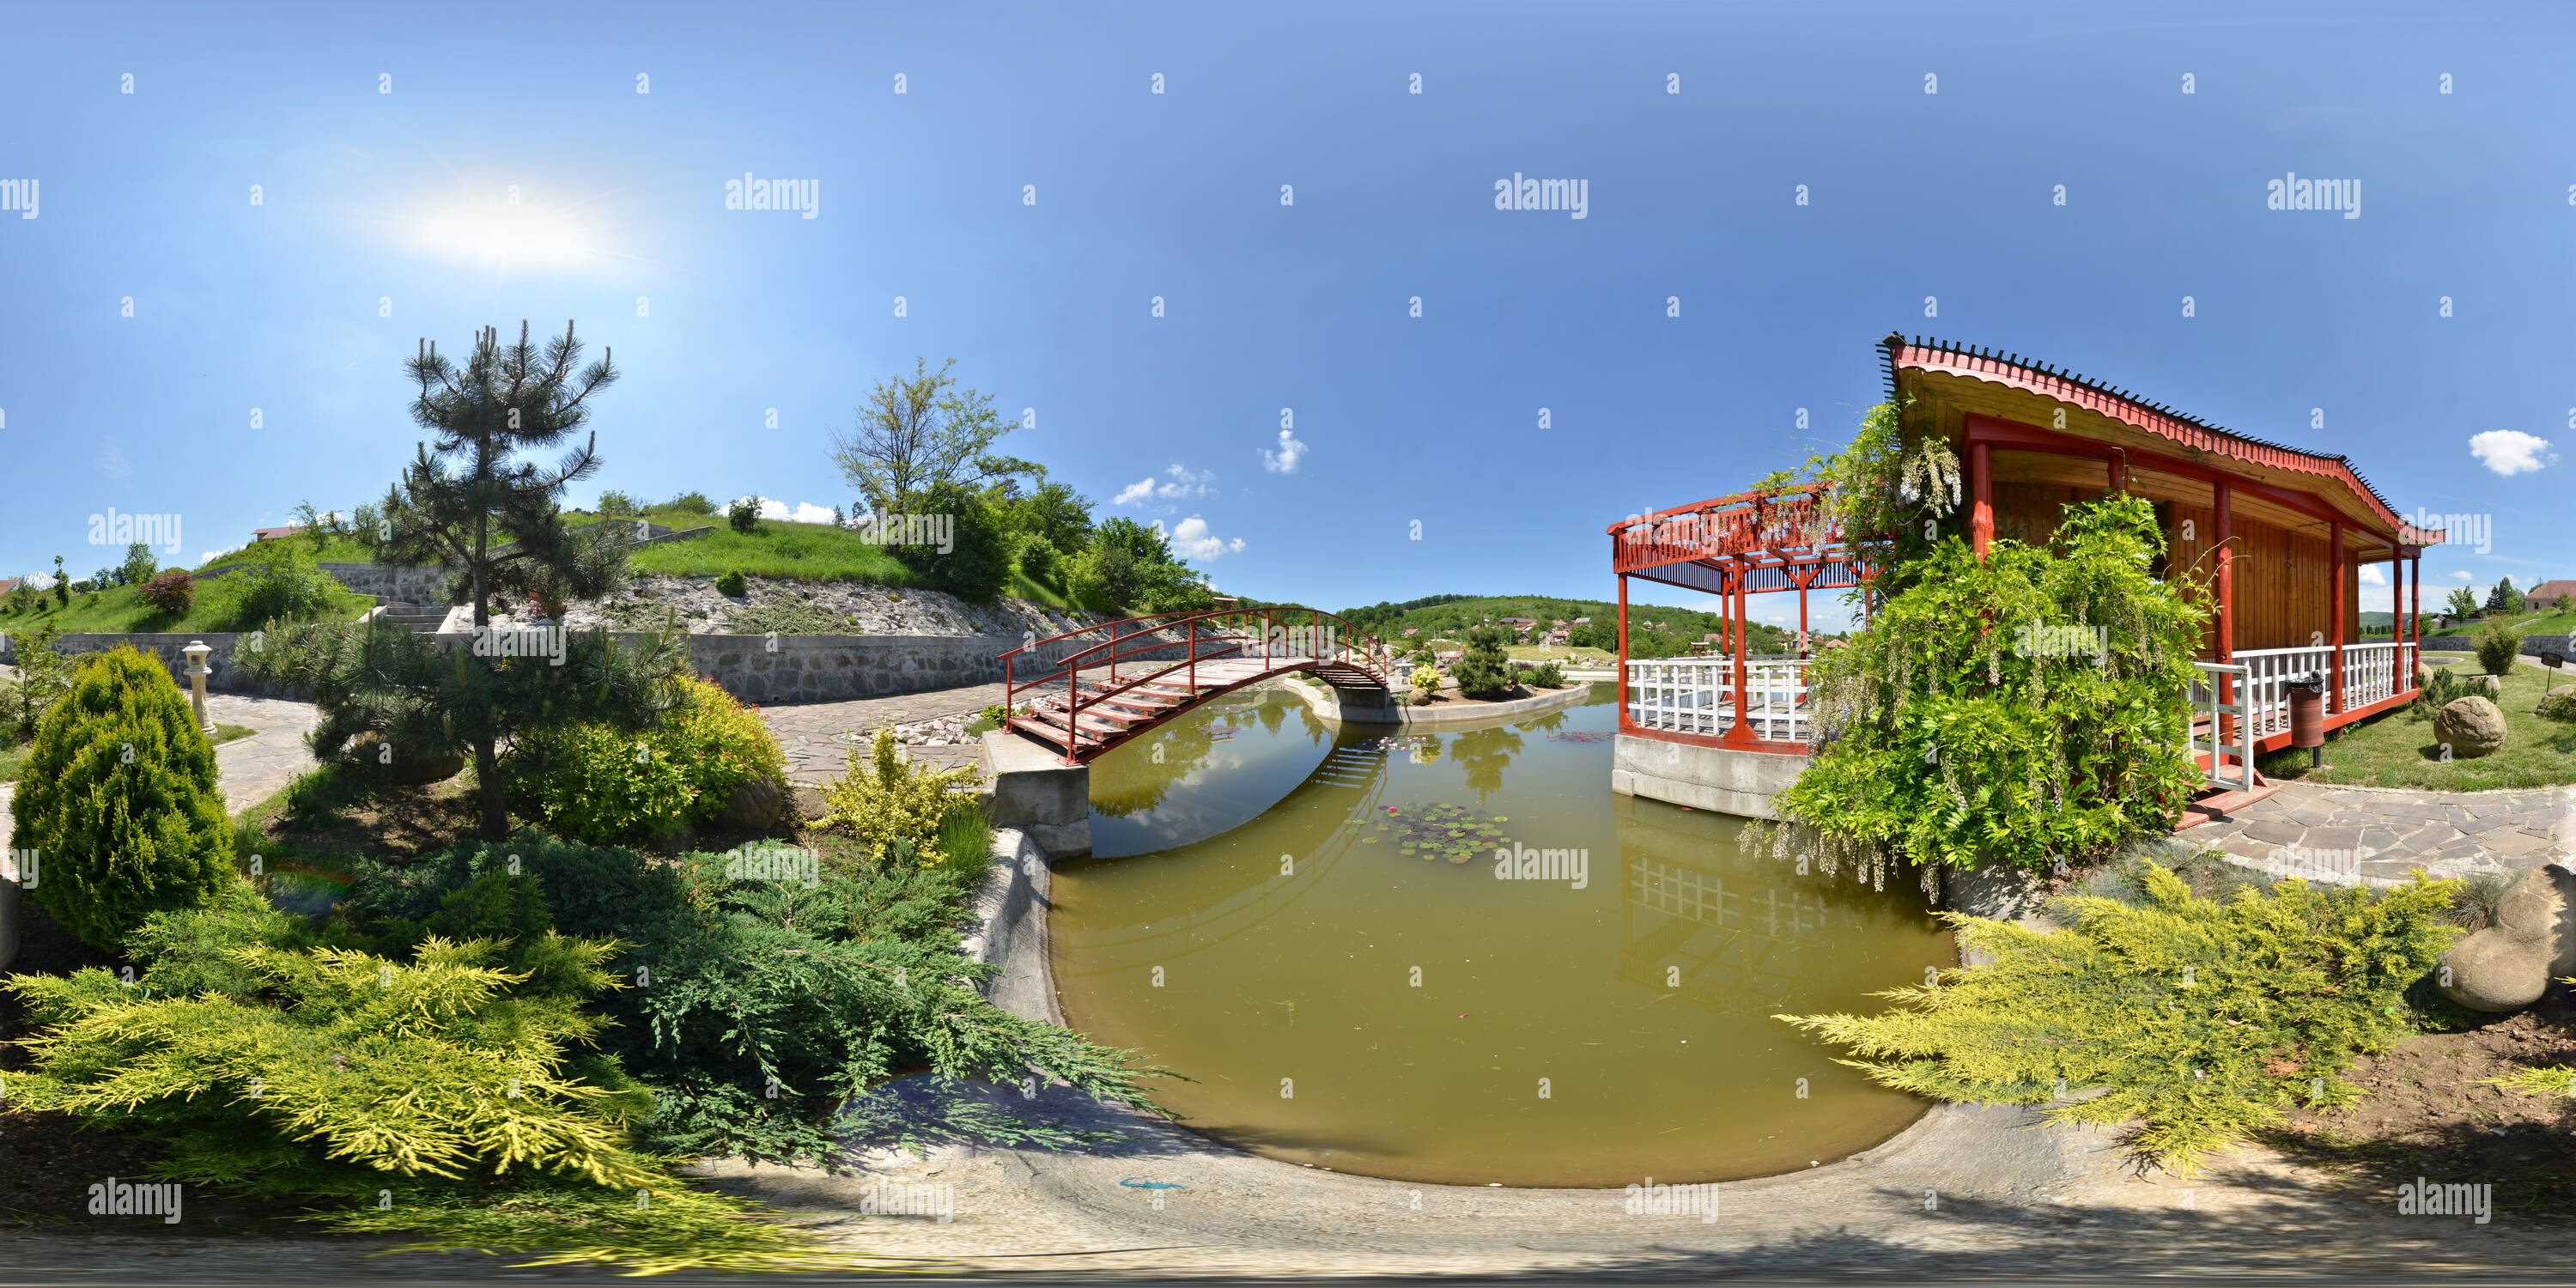 360 degree panoramic view of Japanese Garden at Biological Research Center, Jibou, Romania